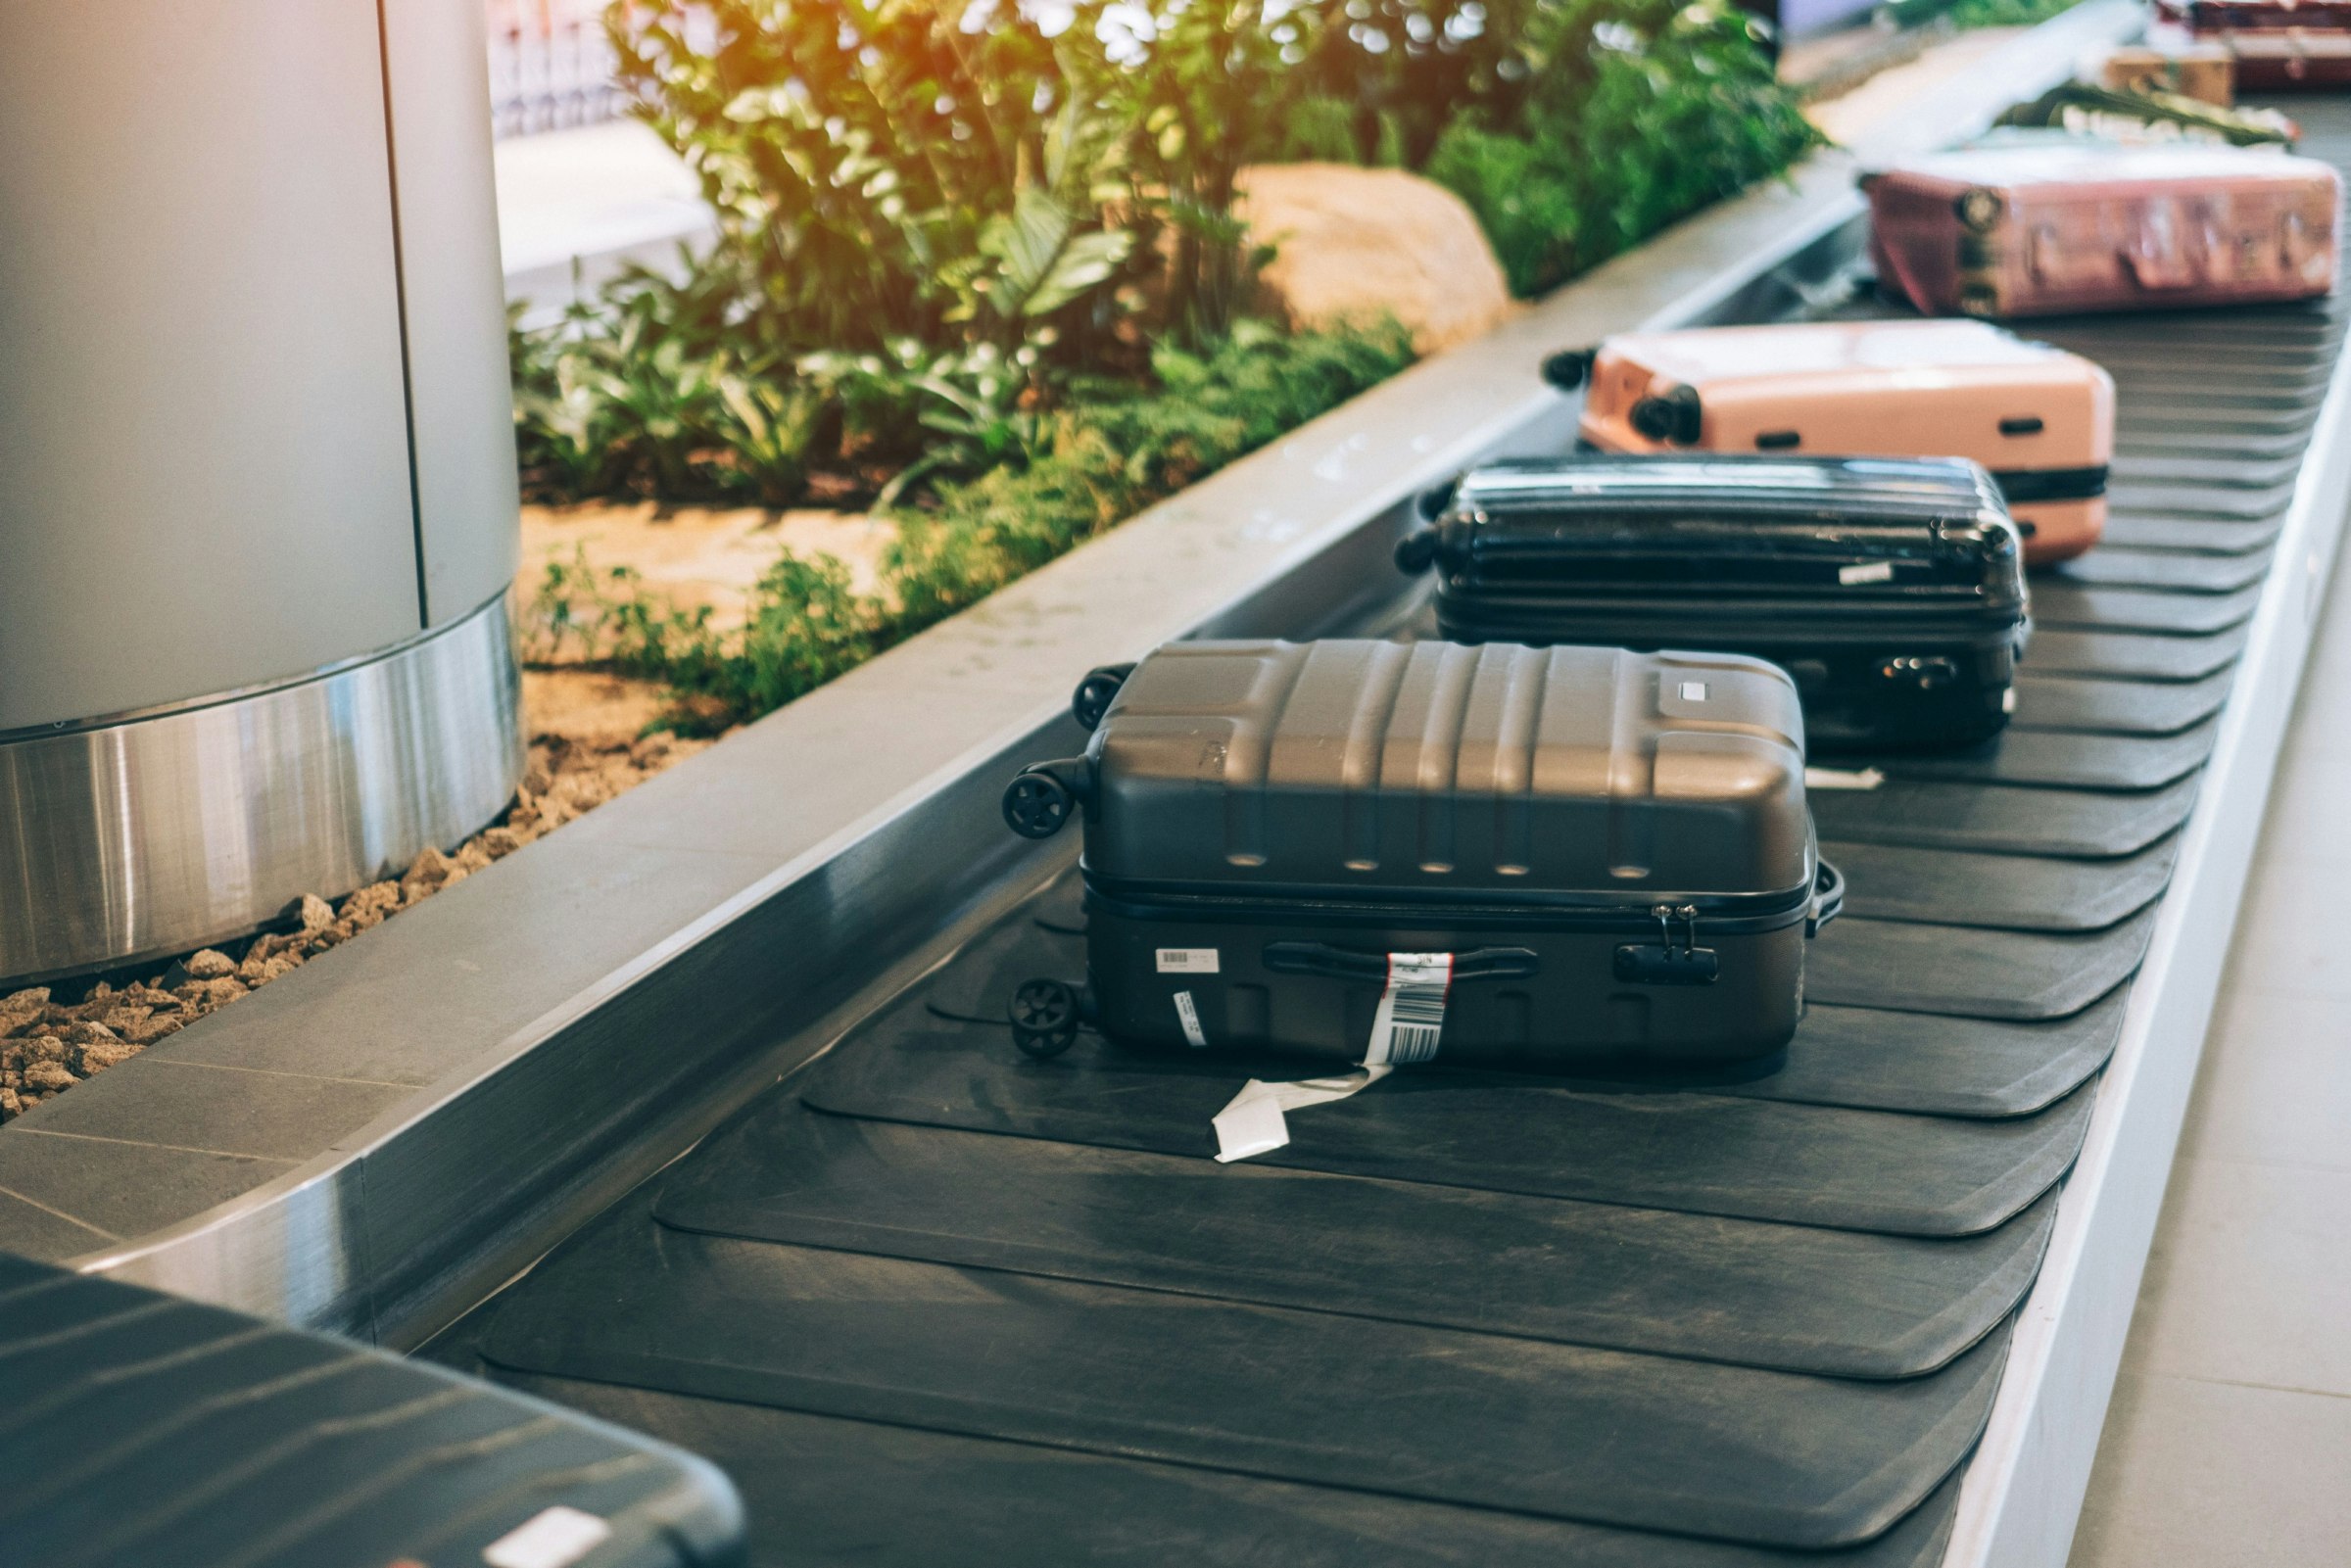 Luggage on a conveyor belt at an international airport